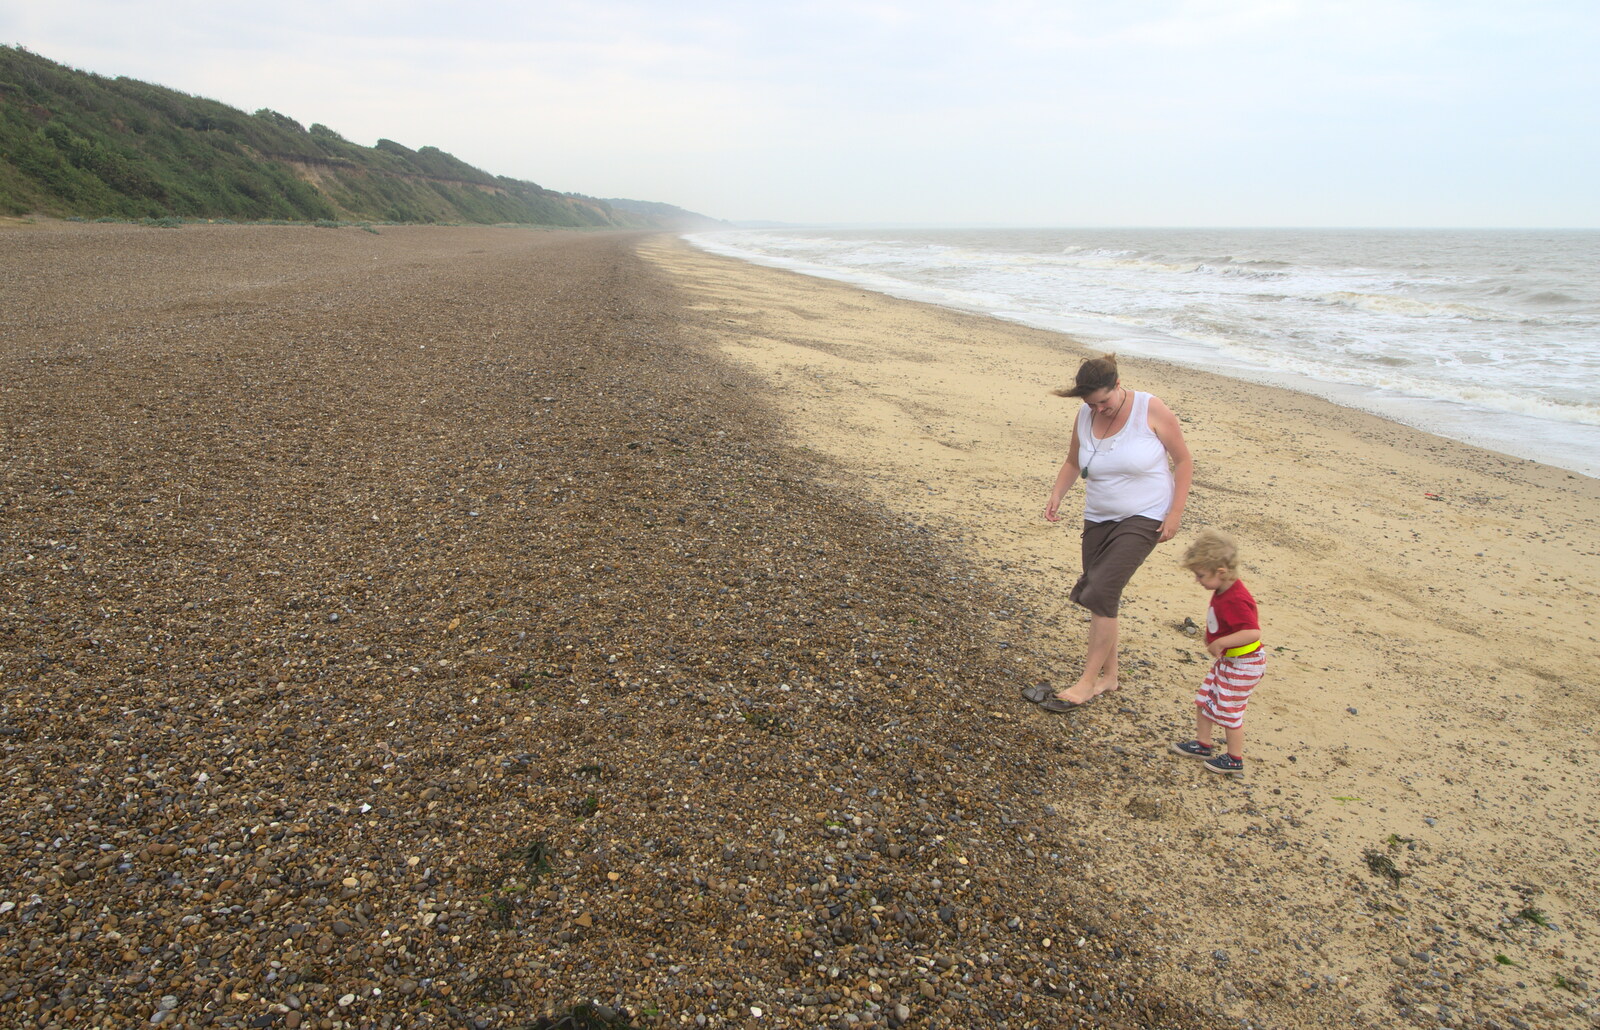 On the shingly beach from Camping by the Seaside, Cliff House, Dunwich, Suffolk - 15th August 2012